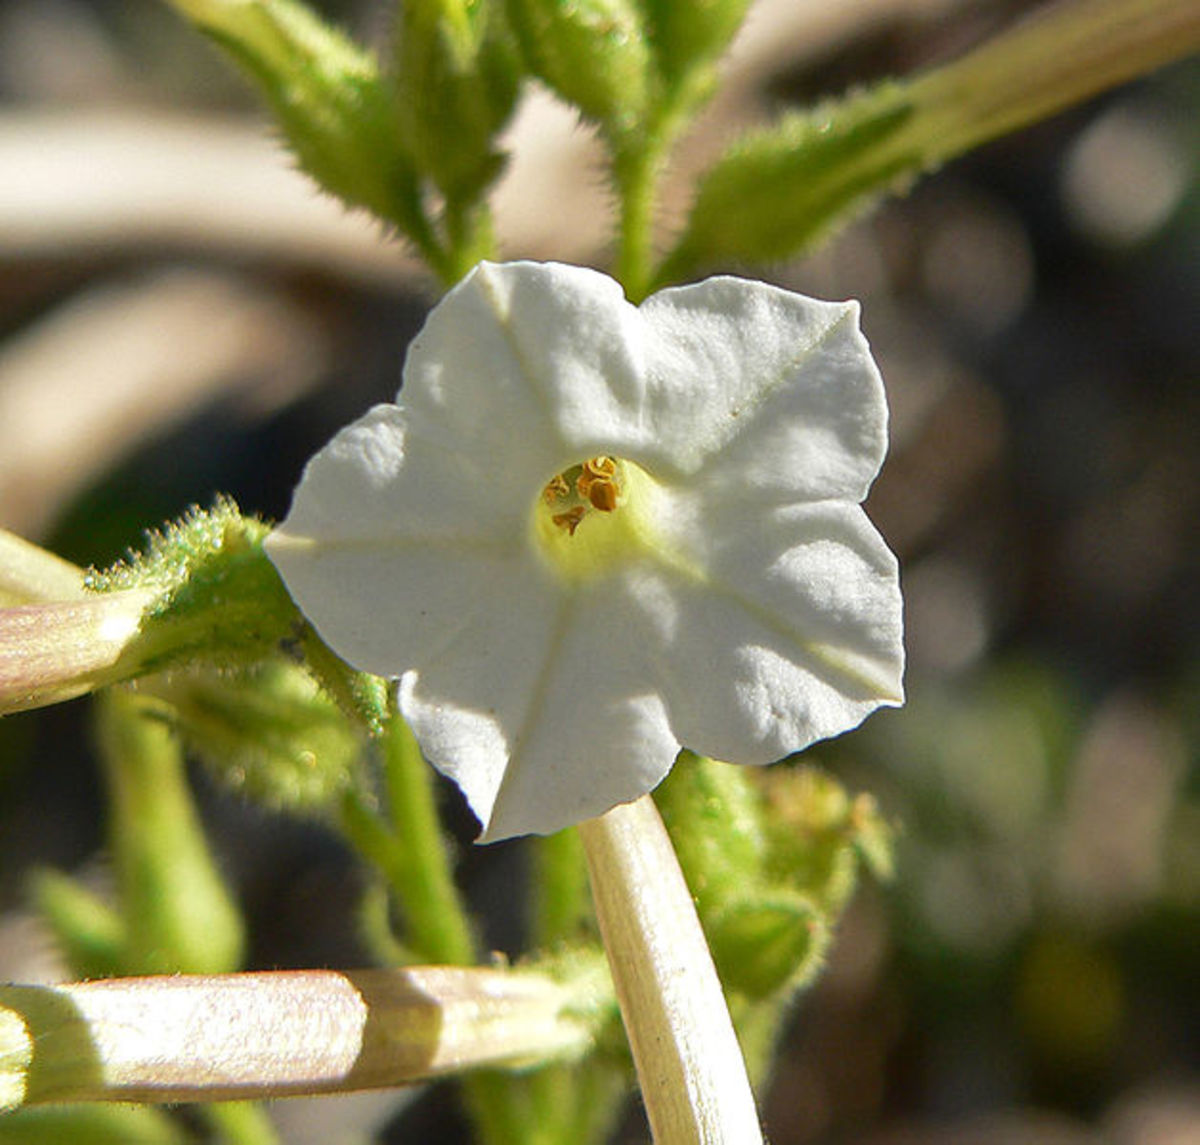 The day flower of coyote tobacco.